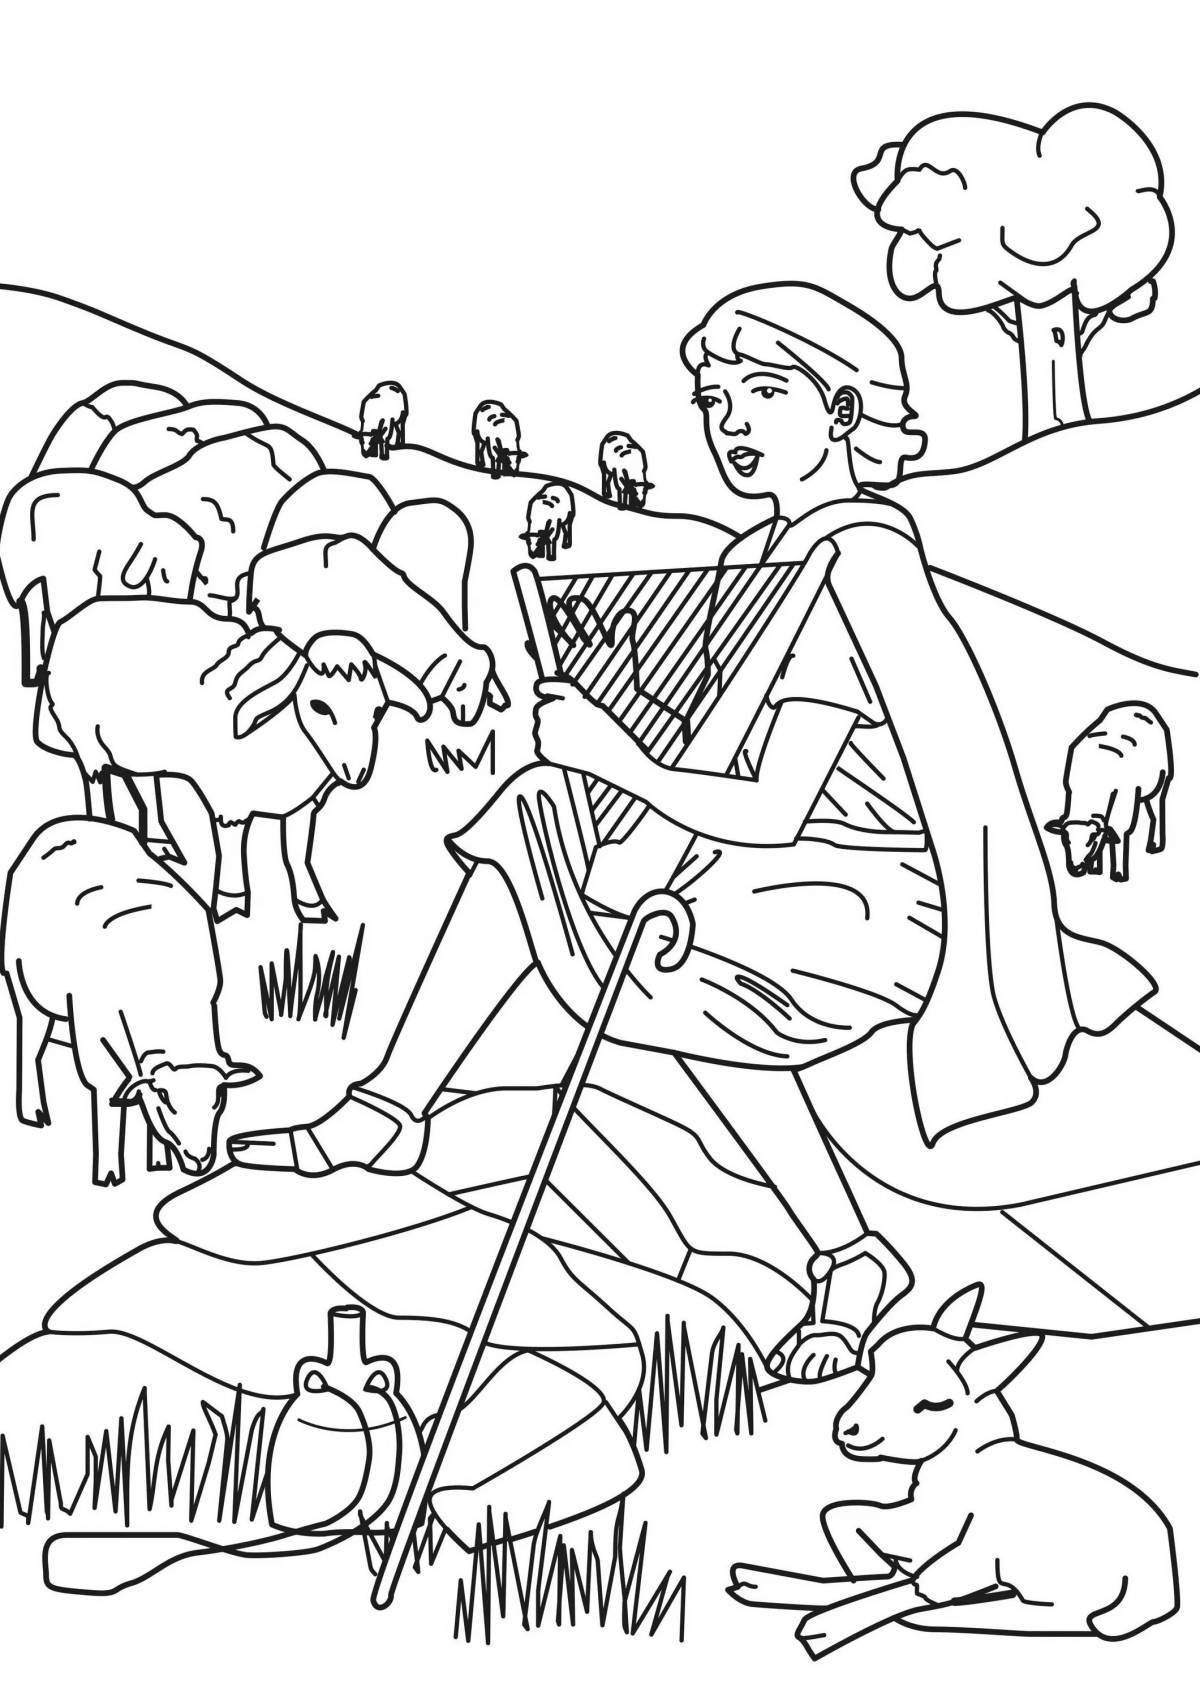 Colorful shepherd coloring page